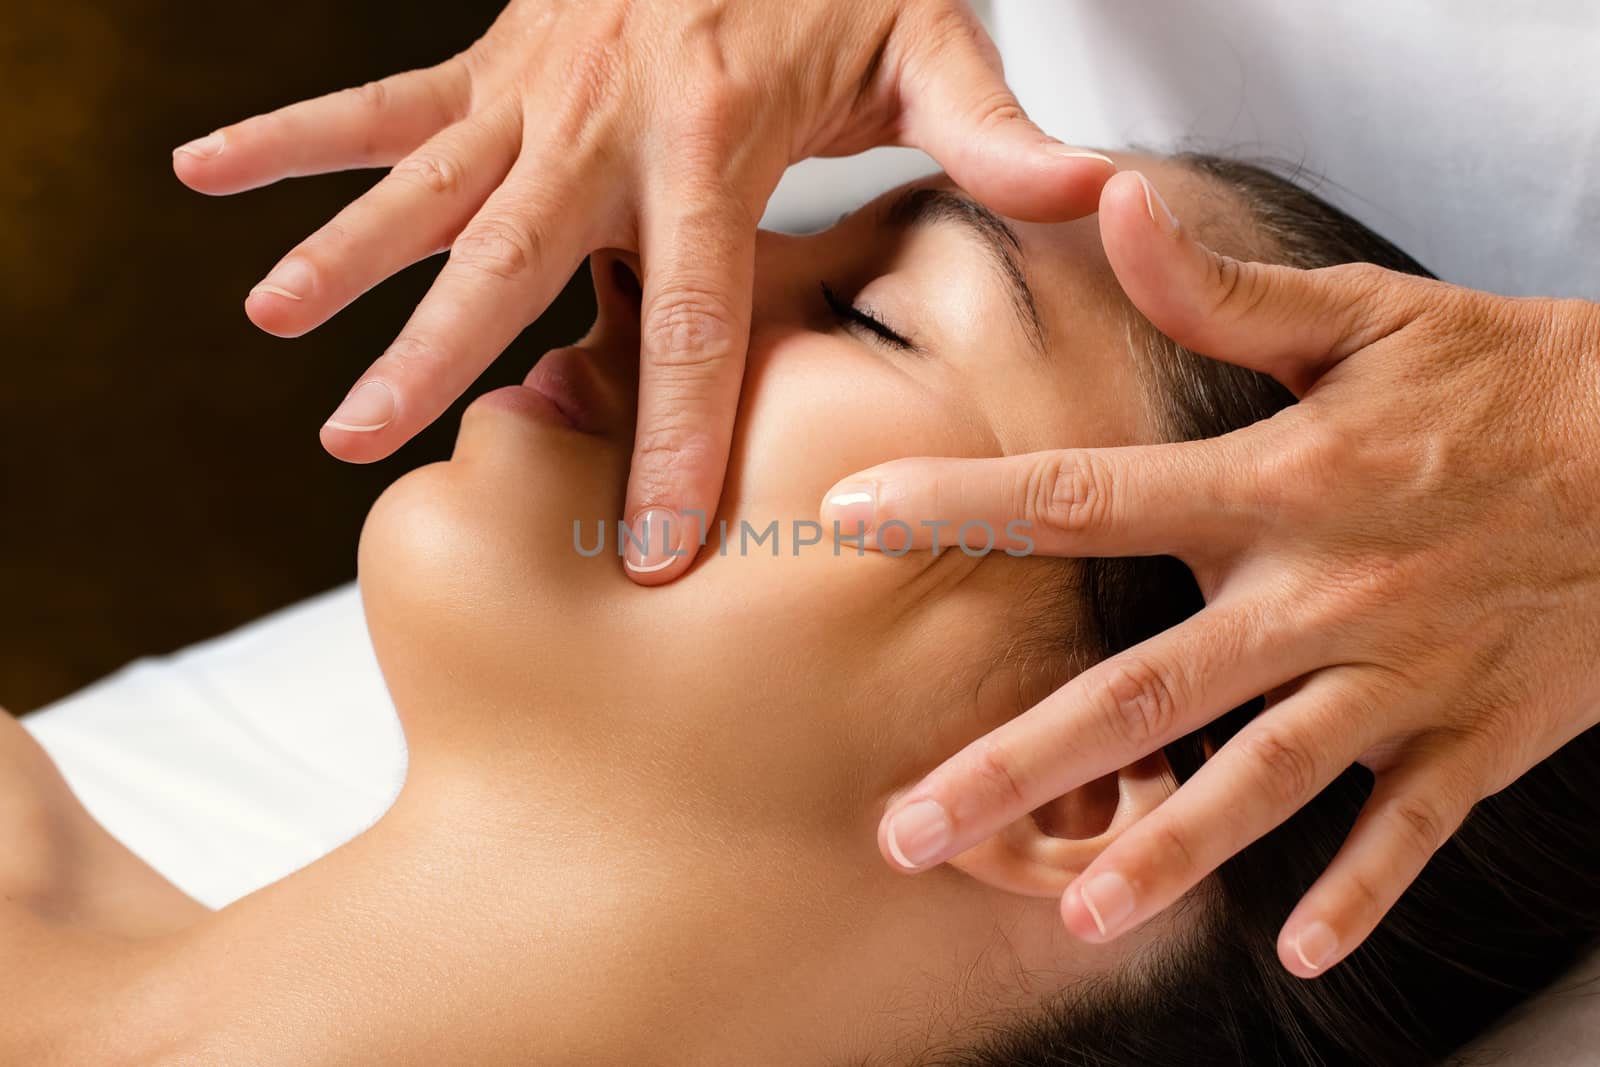 Close up portrait of woman at beauty treatment in spa.Therapist massaging and stretching female cheek for product penetration.